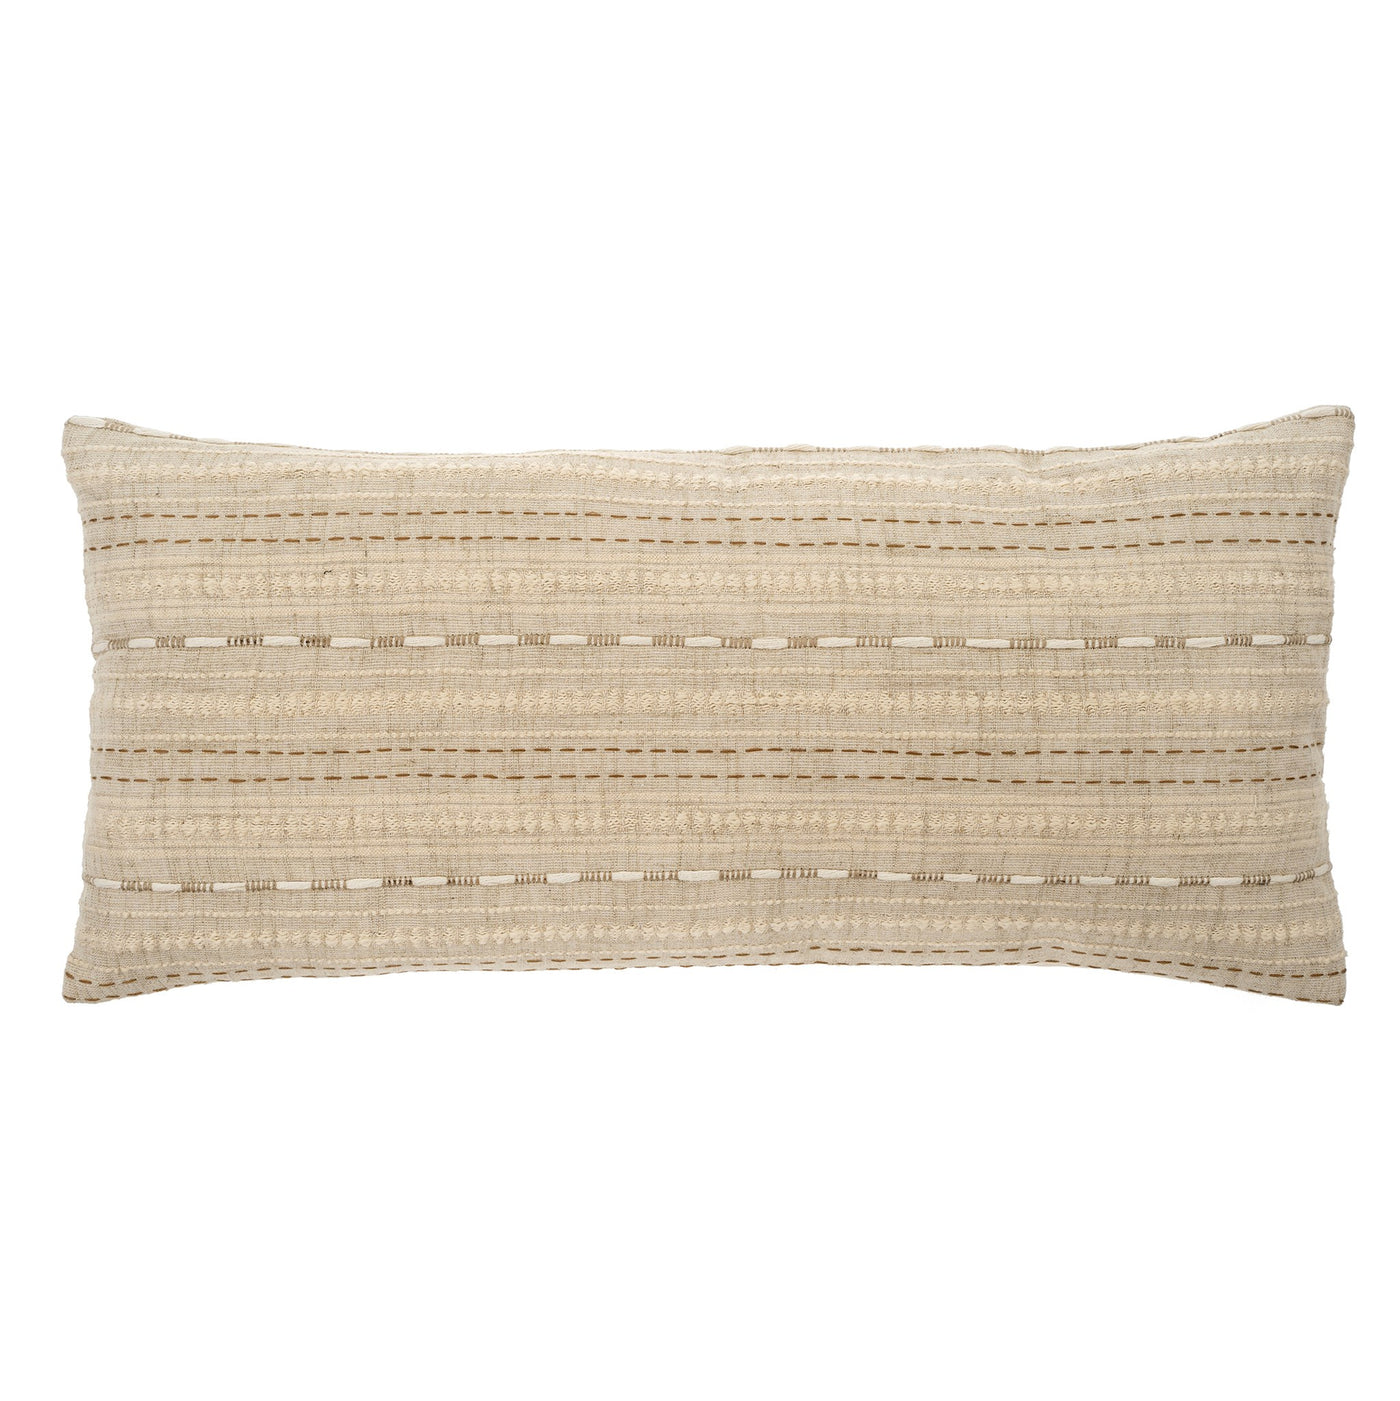 Alta Embroidered Pillow 14x31"